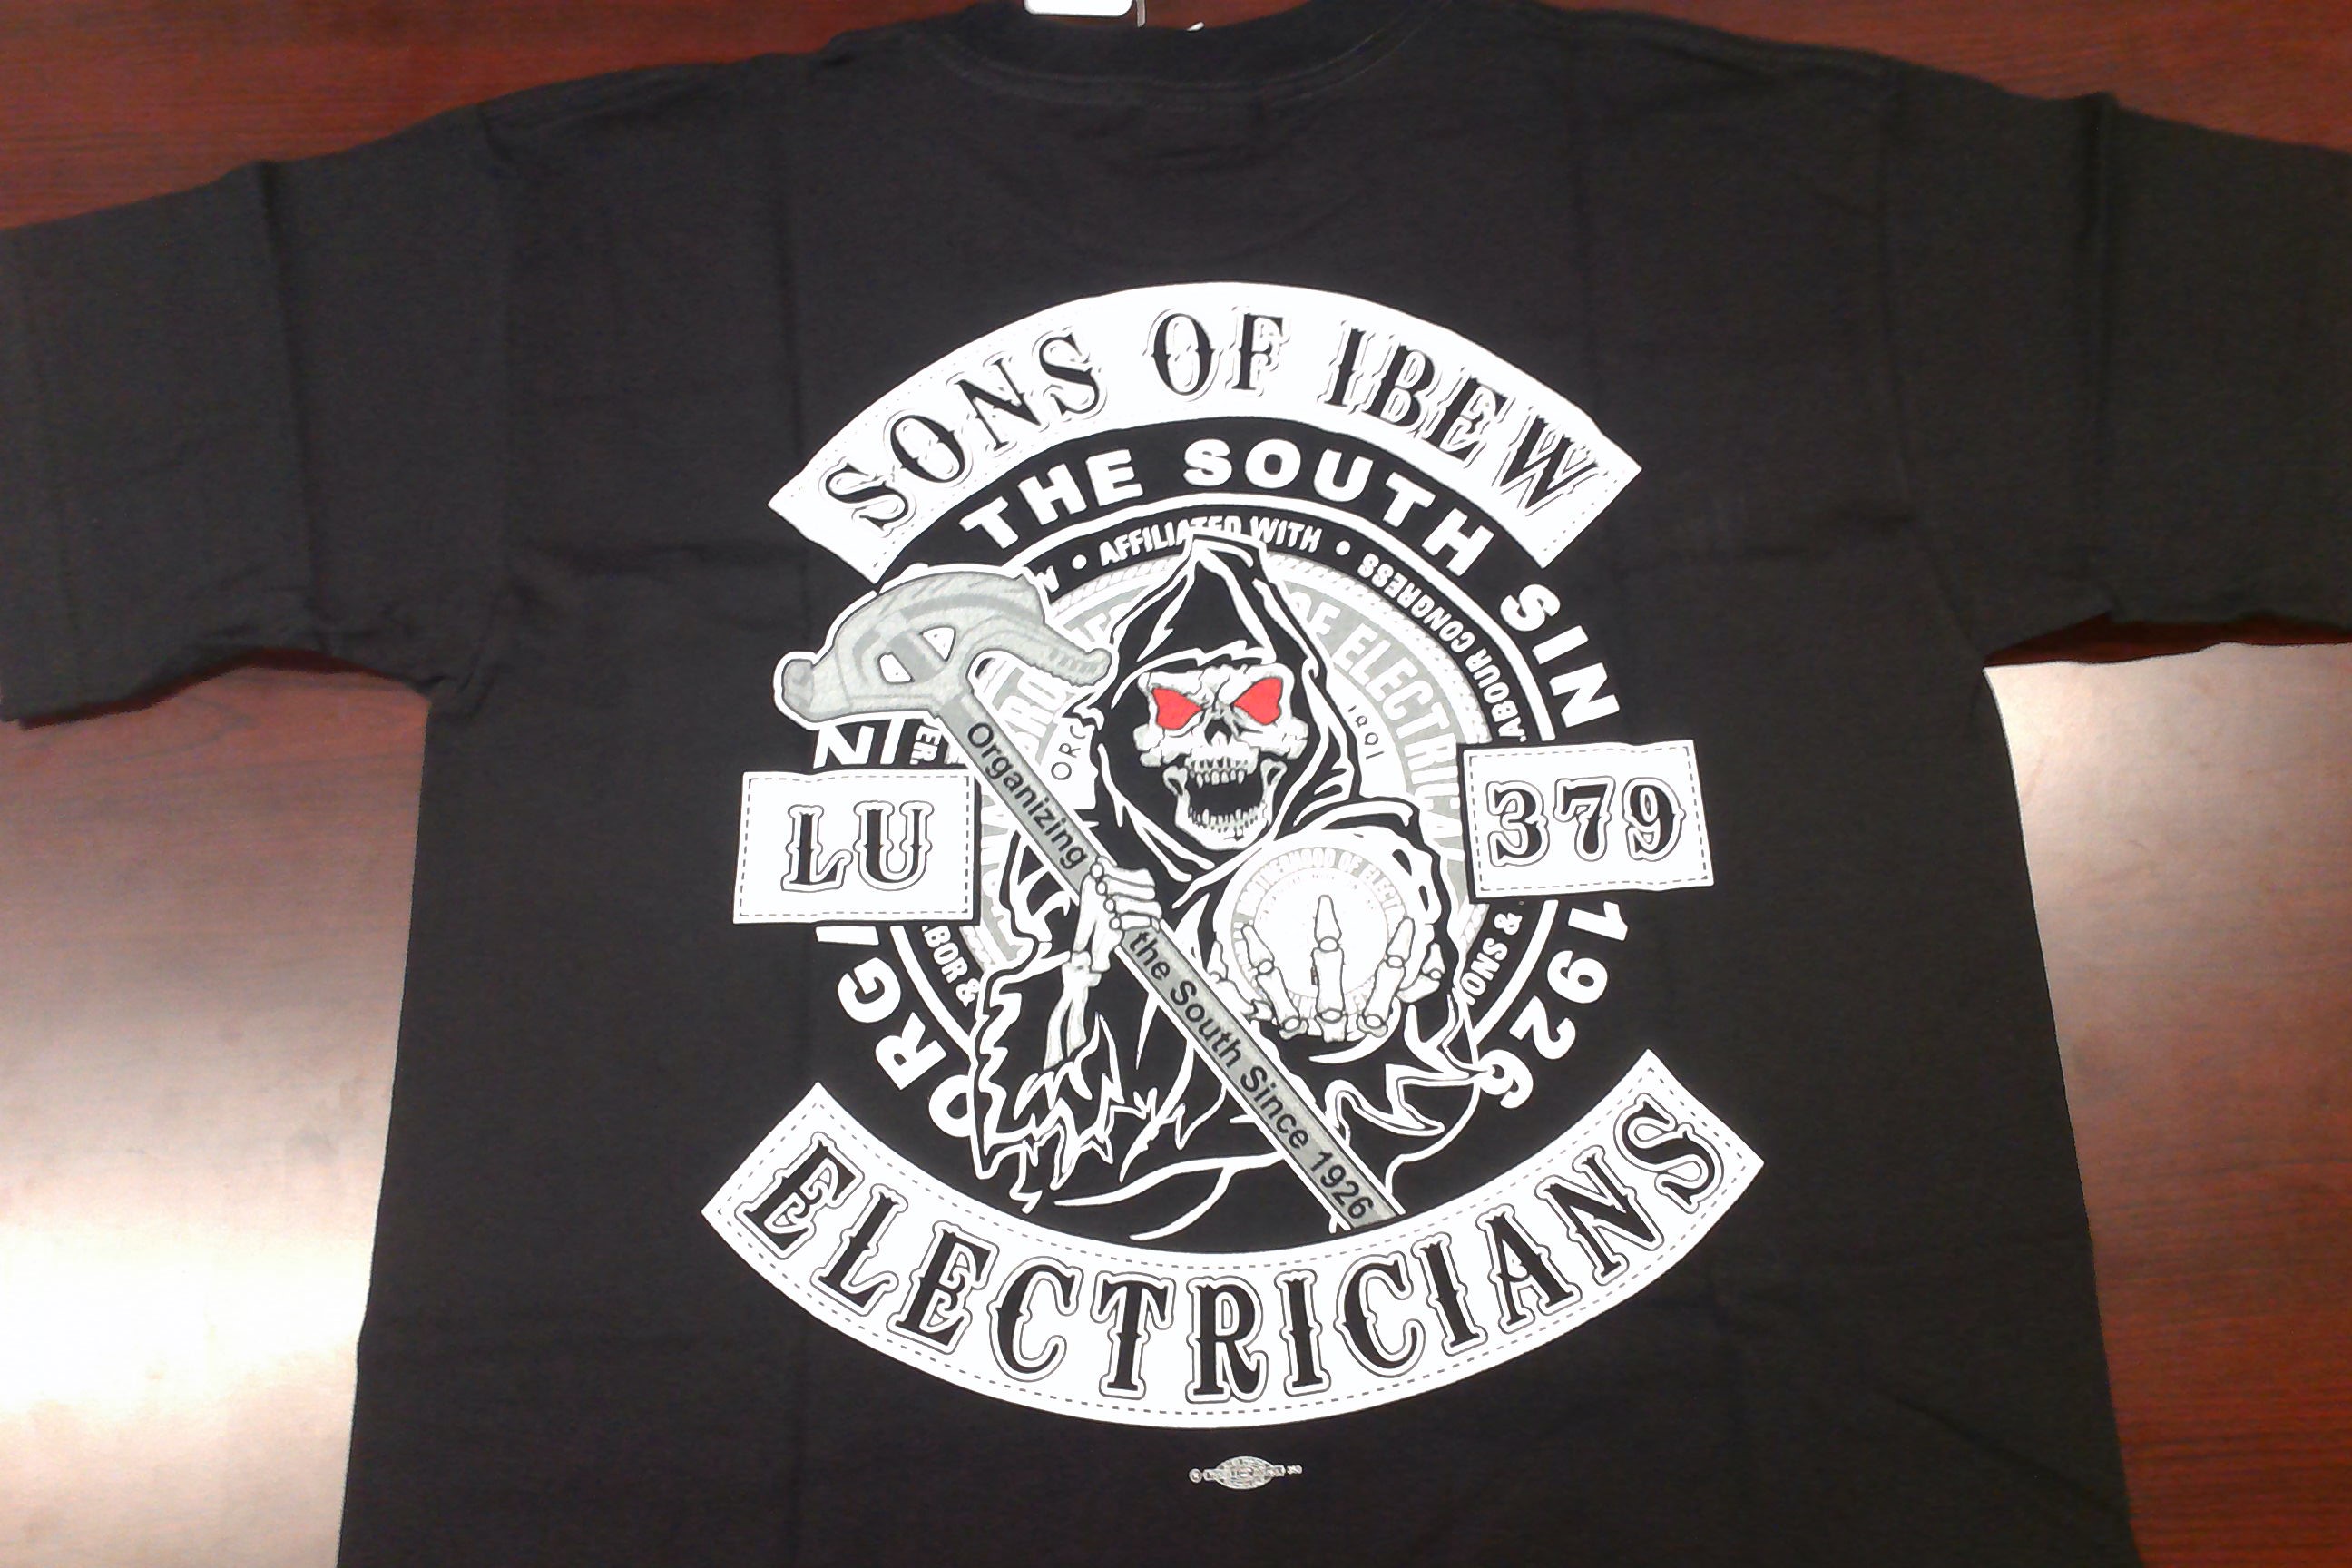 Sons Of the IBEW (Electricians)